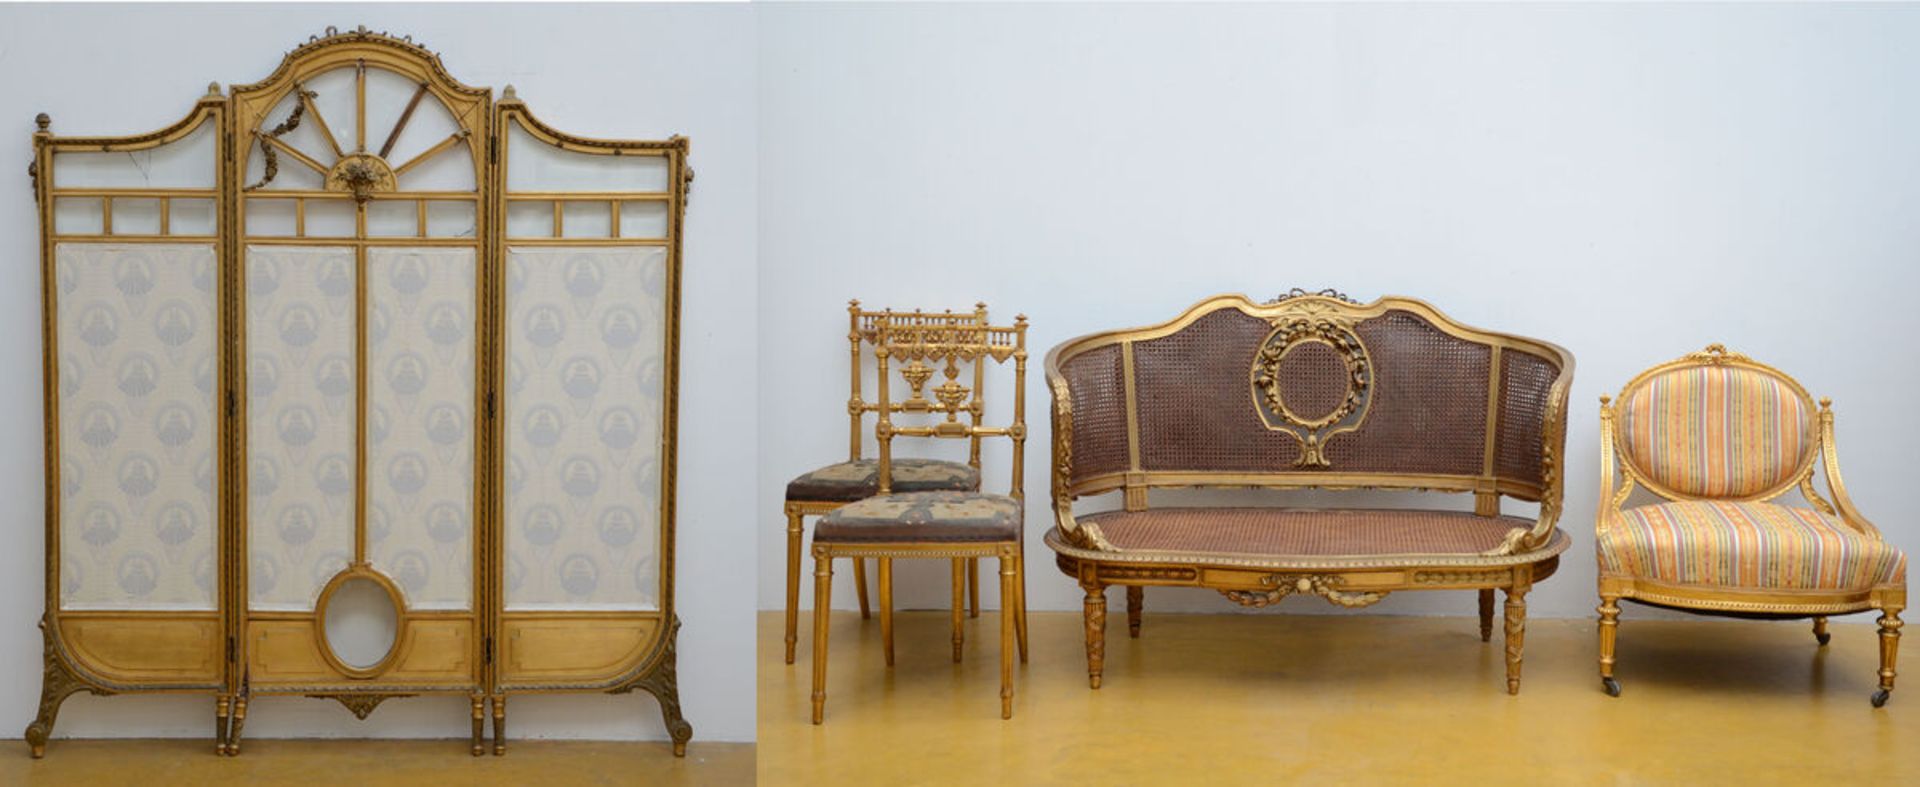 Lot gilt furniture in Louis XVI style: canapé + fauteuil + 2 chairs + gilt room divider (*)